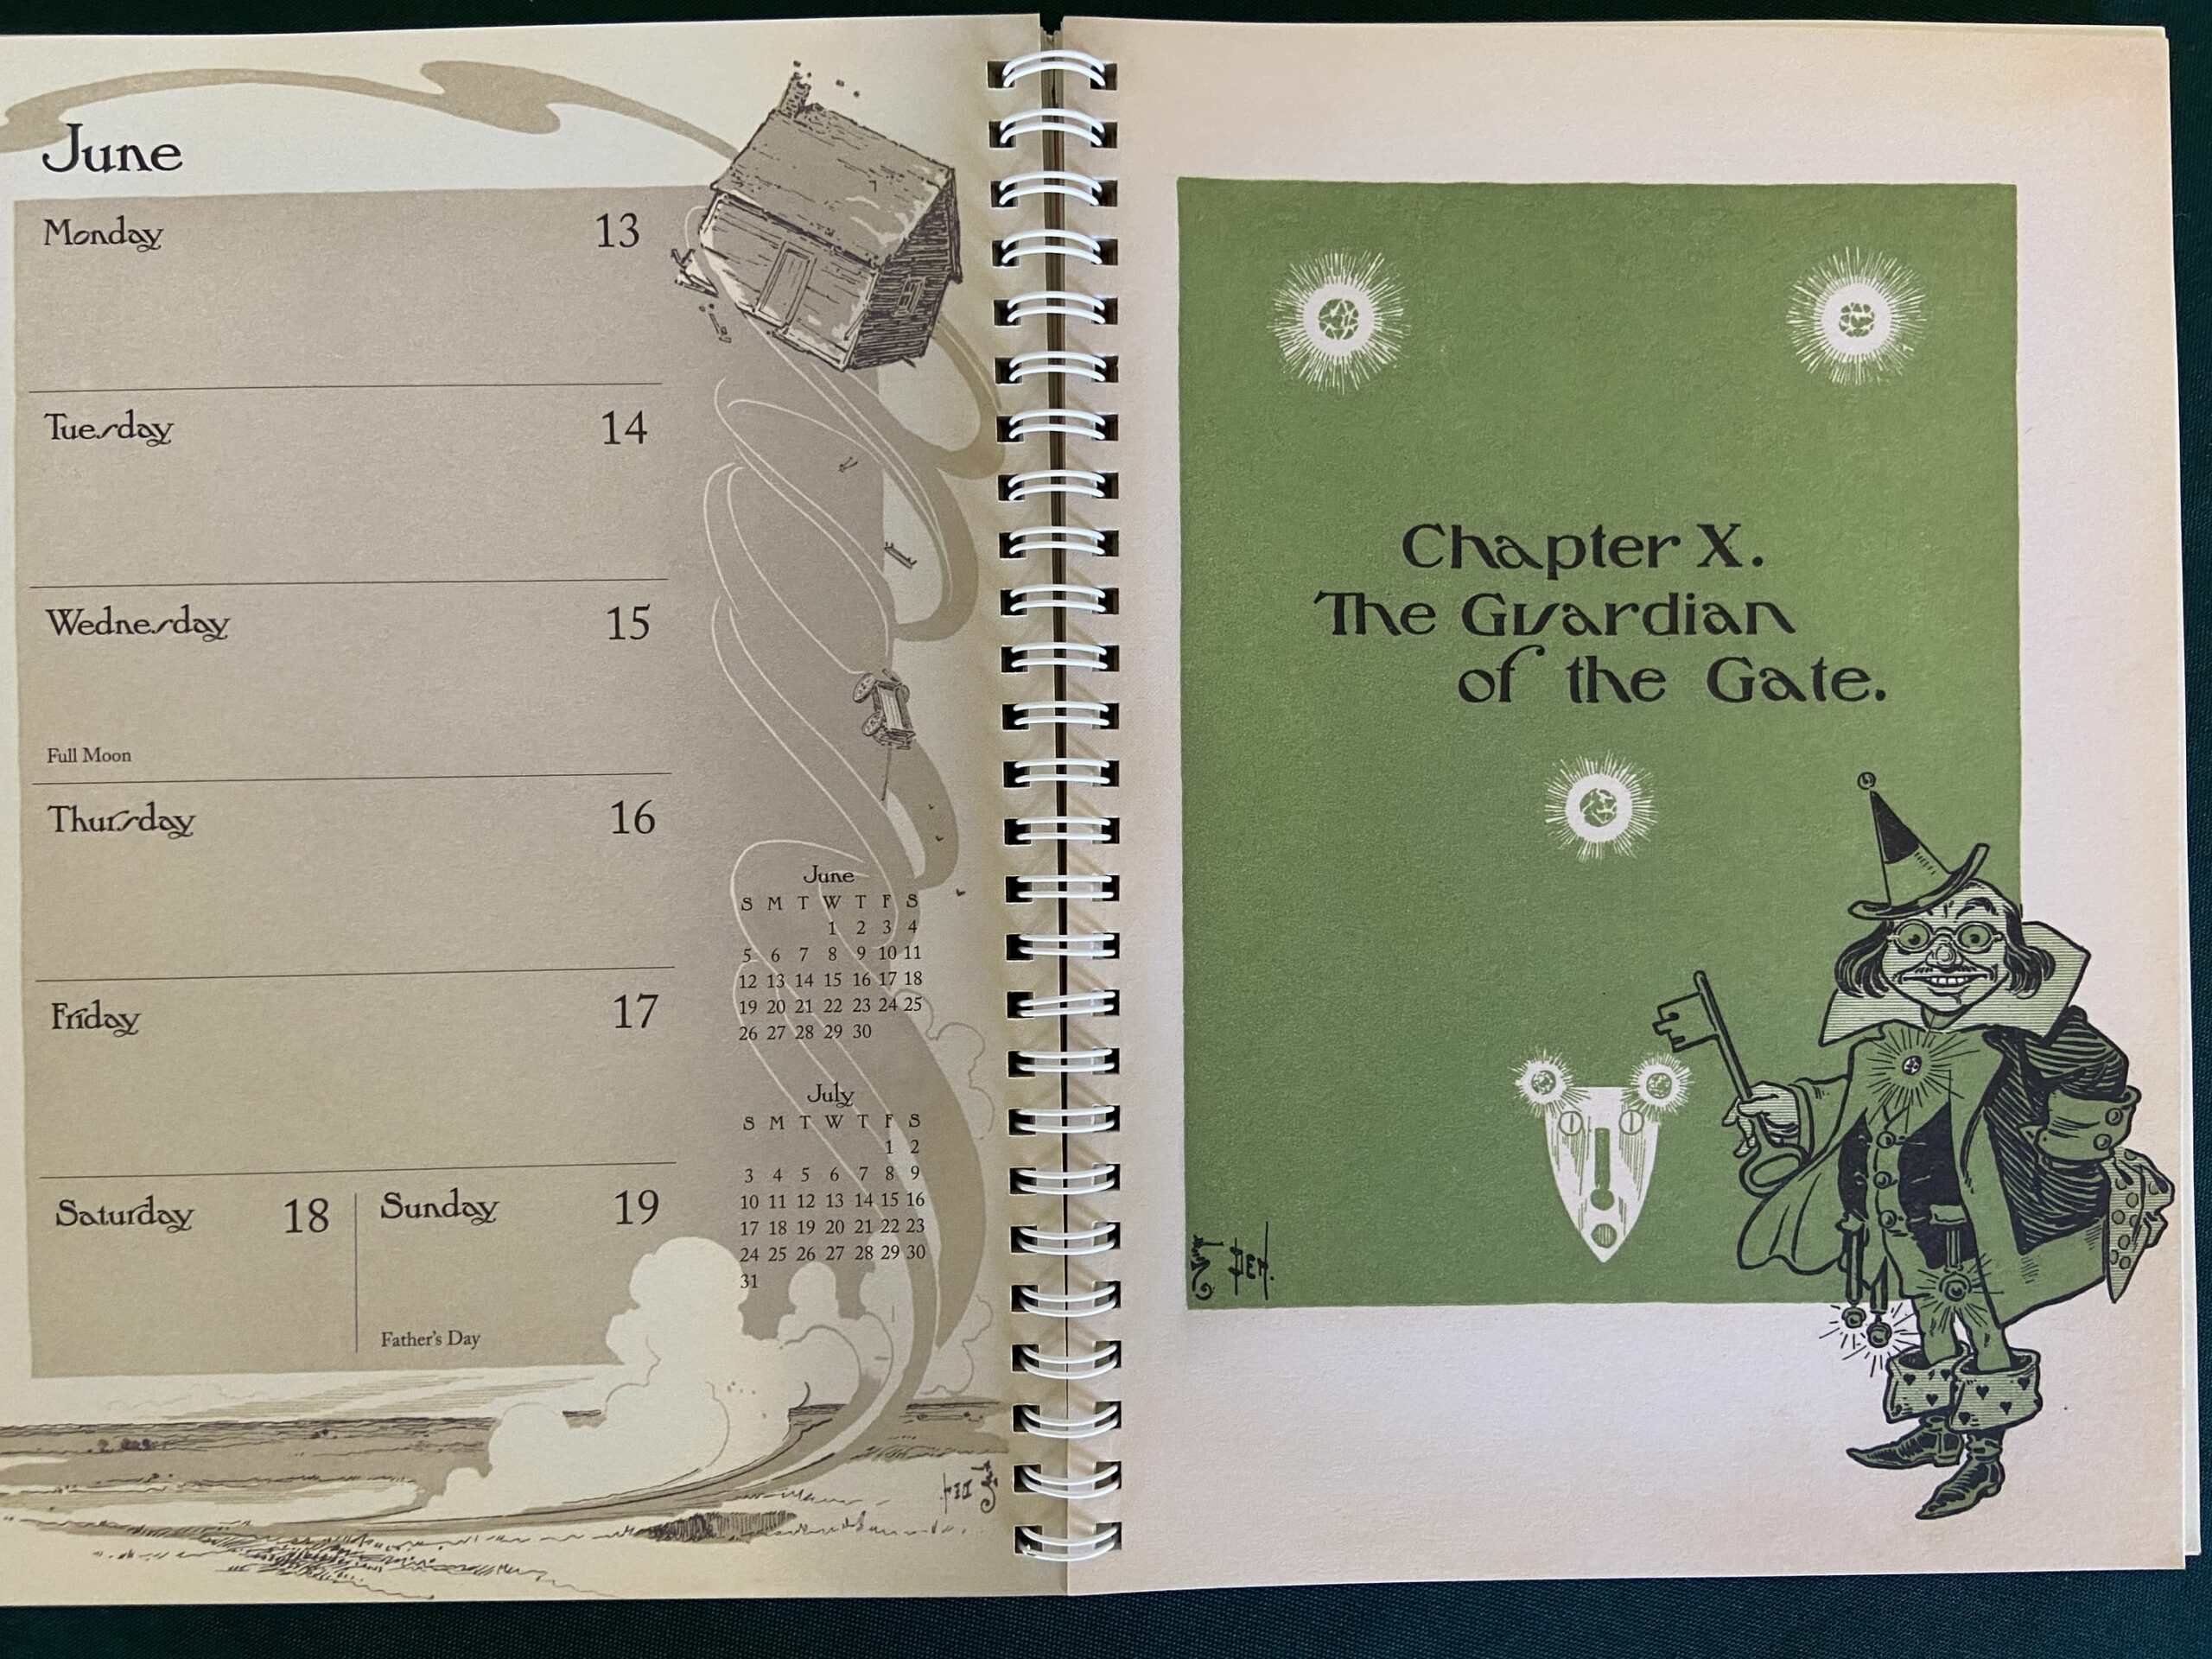 Sold The Wonderful Wizard of Oz 2011 Desk Calendar by Library of